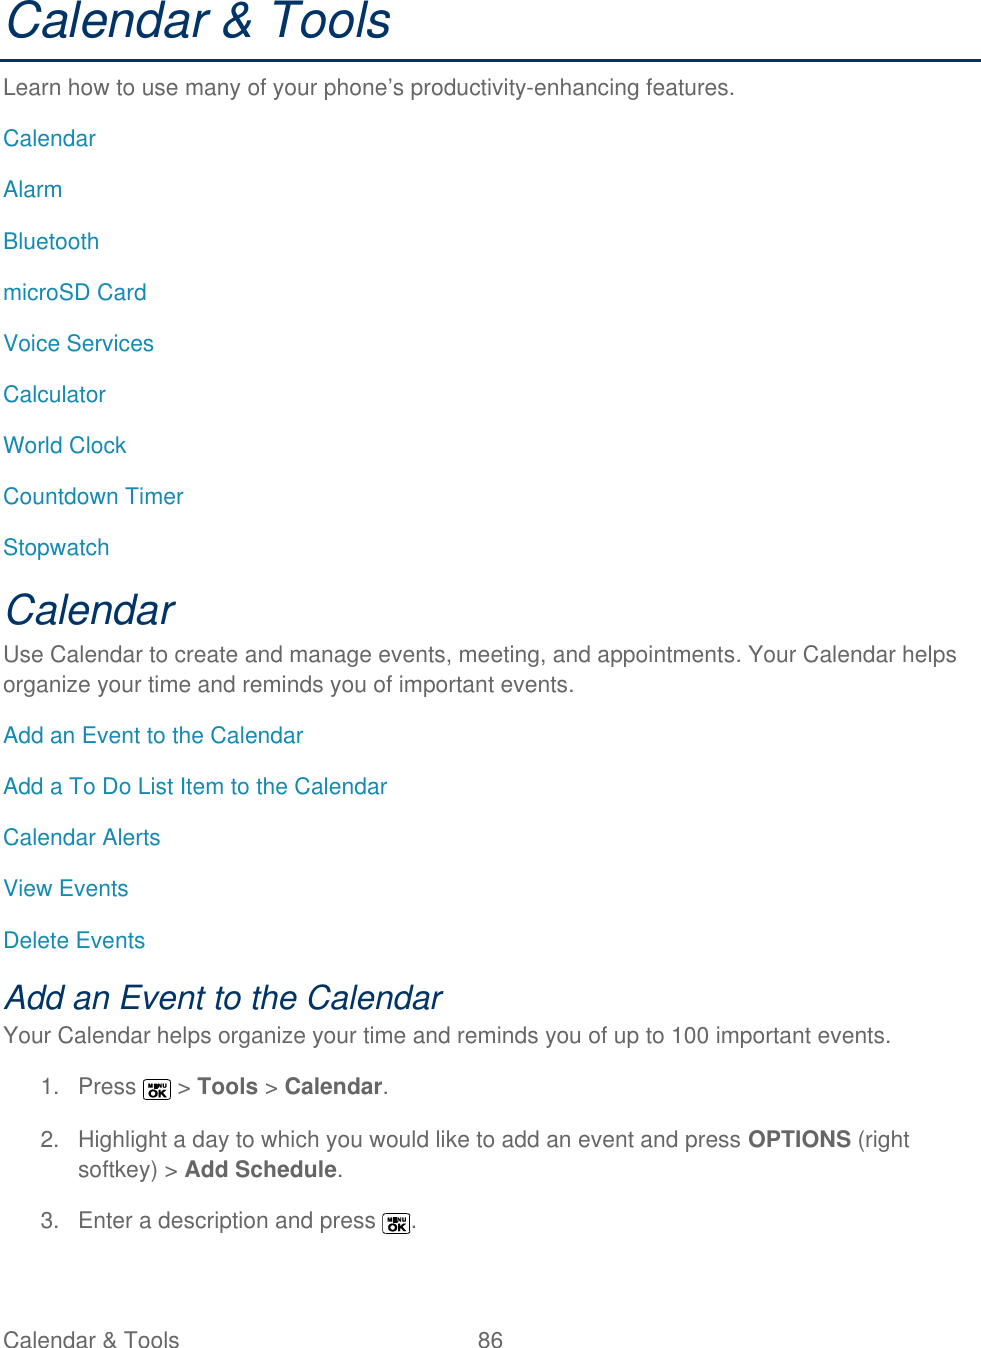  Calendar &amp; Tools  86   Calendar &amp; Tools Learn how to use many of your phone’s productivity-enhancing features. Calendar Alarm Bluetooth microSD Card Voice Services Calculator World Clock Countdown Timer Stopwatch Calendar Use Calendar to create and manage events, meeting, and appointments. Your Calendar helps organize your time and reminds you of important events. Add an Event to the Calendar Add a To Do List Item to the Calendar Calendar Alerts View Events Delete Events Add an Event to the Calendar Your Calendar helps organize your time and reminds you of up to 100 important events. 1.  Press   &gt; Tools &gt; Calendar. 2.  Highlight a day to which you would like to add an event and press OPTIONS (right softkey) &gt; Add Schedule. 3.  Enter a description and press  . 